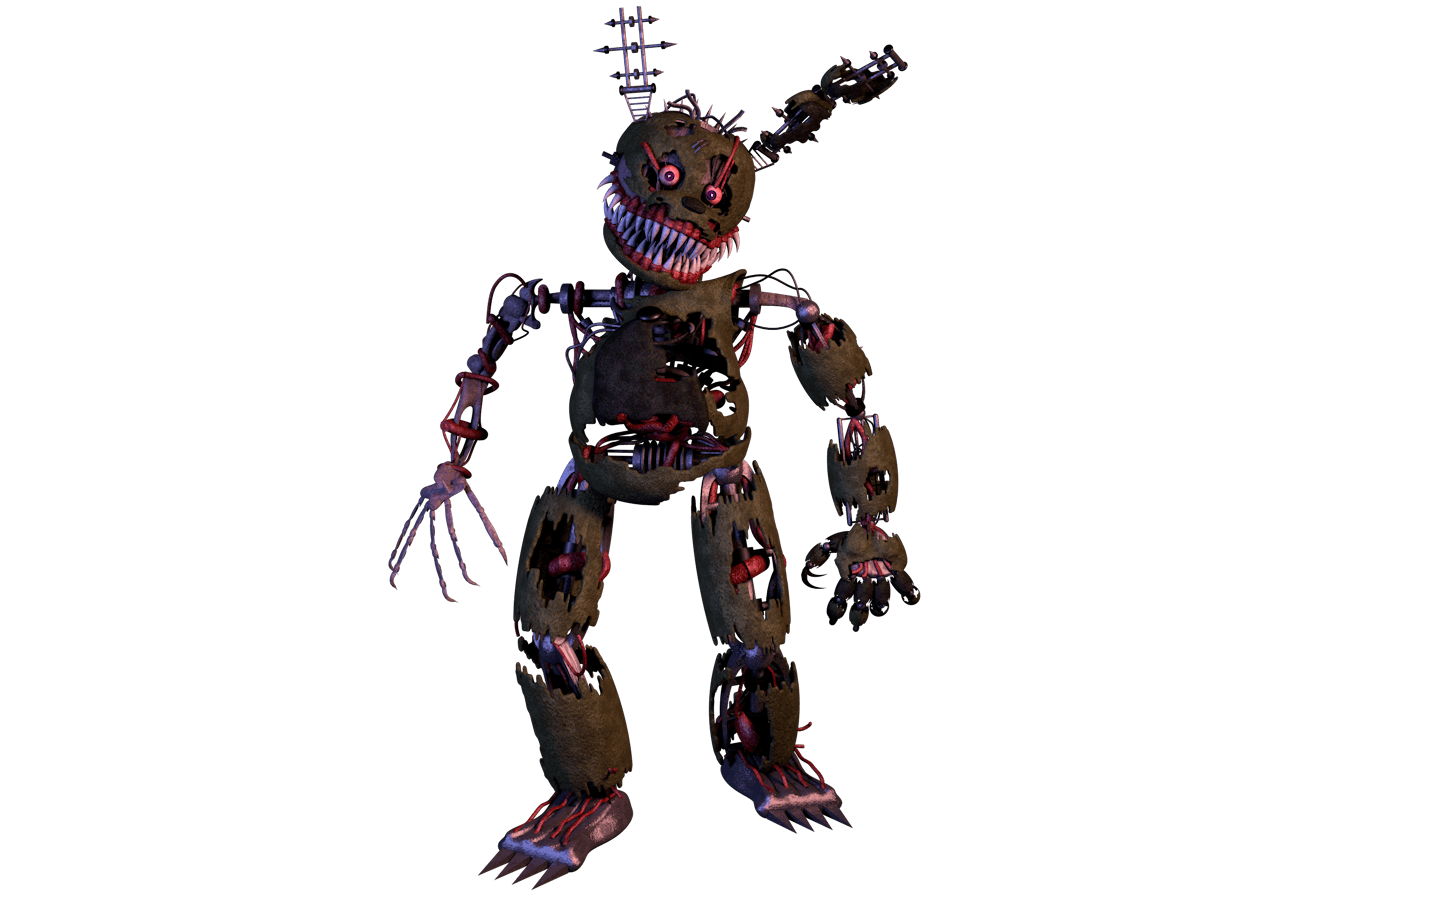 Just an update on the Nightmare Springtrap model, made him less